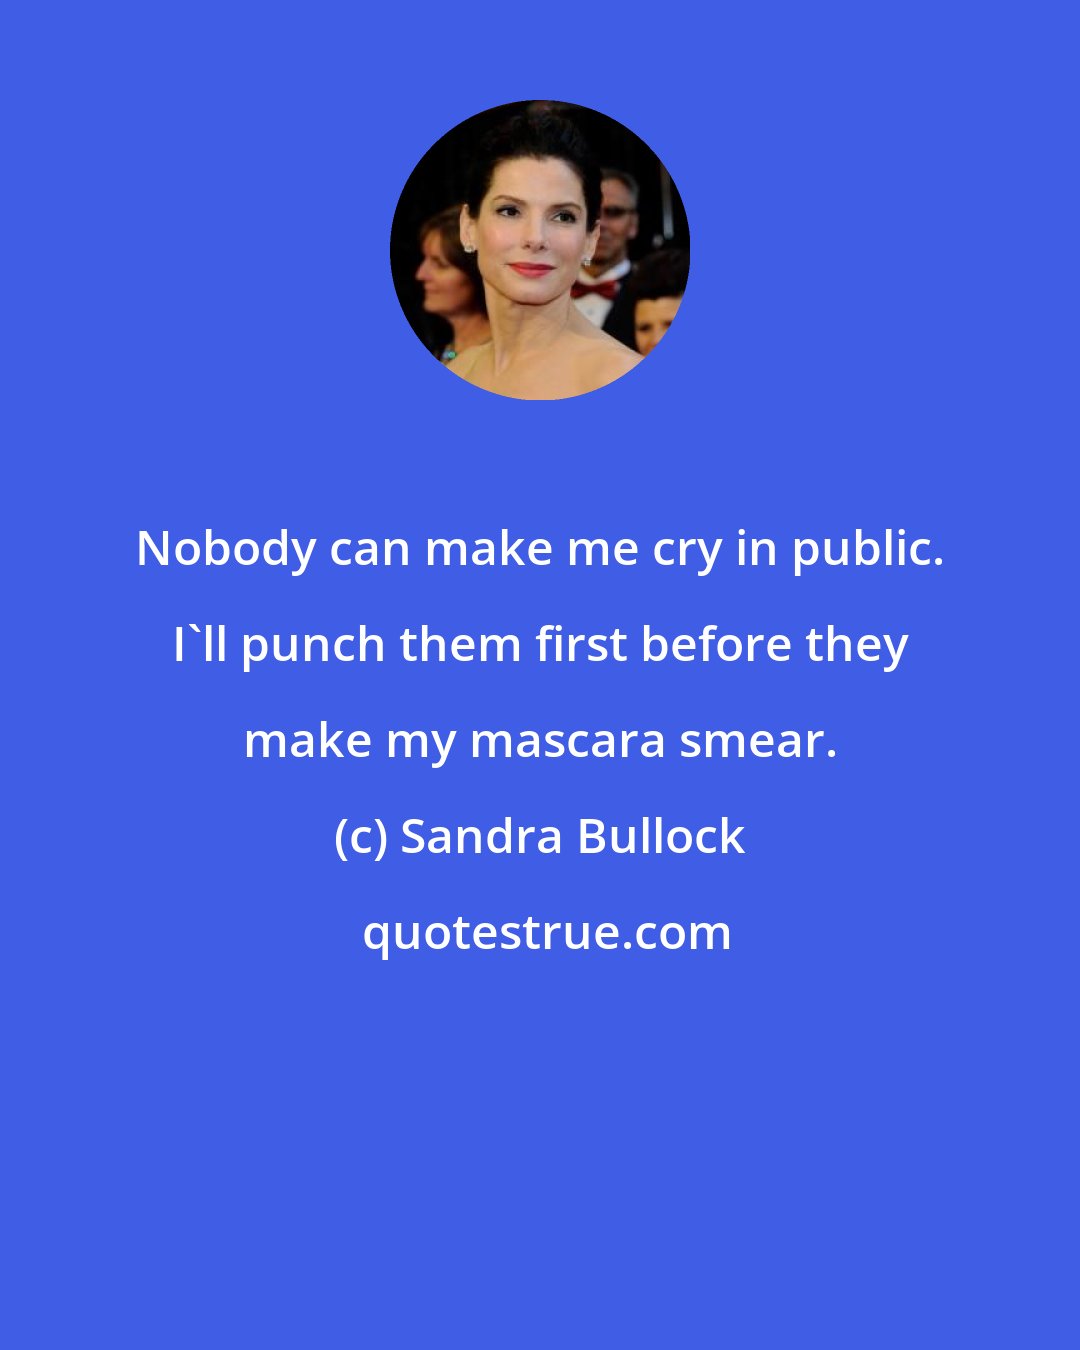 Sandra Bullock: Nobody can make me cry in public. I'll punch them first before they make my mascara smear.